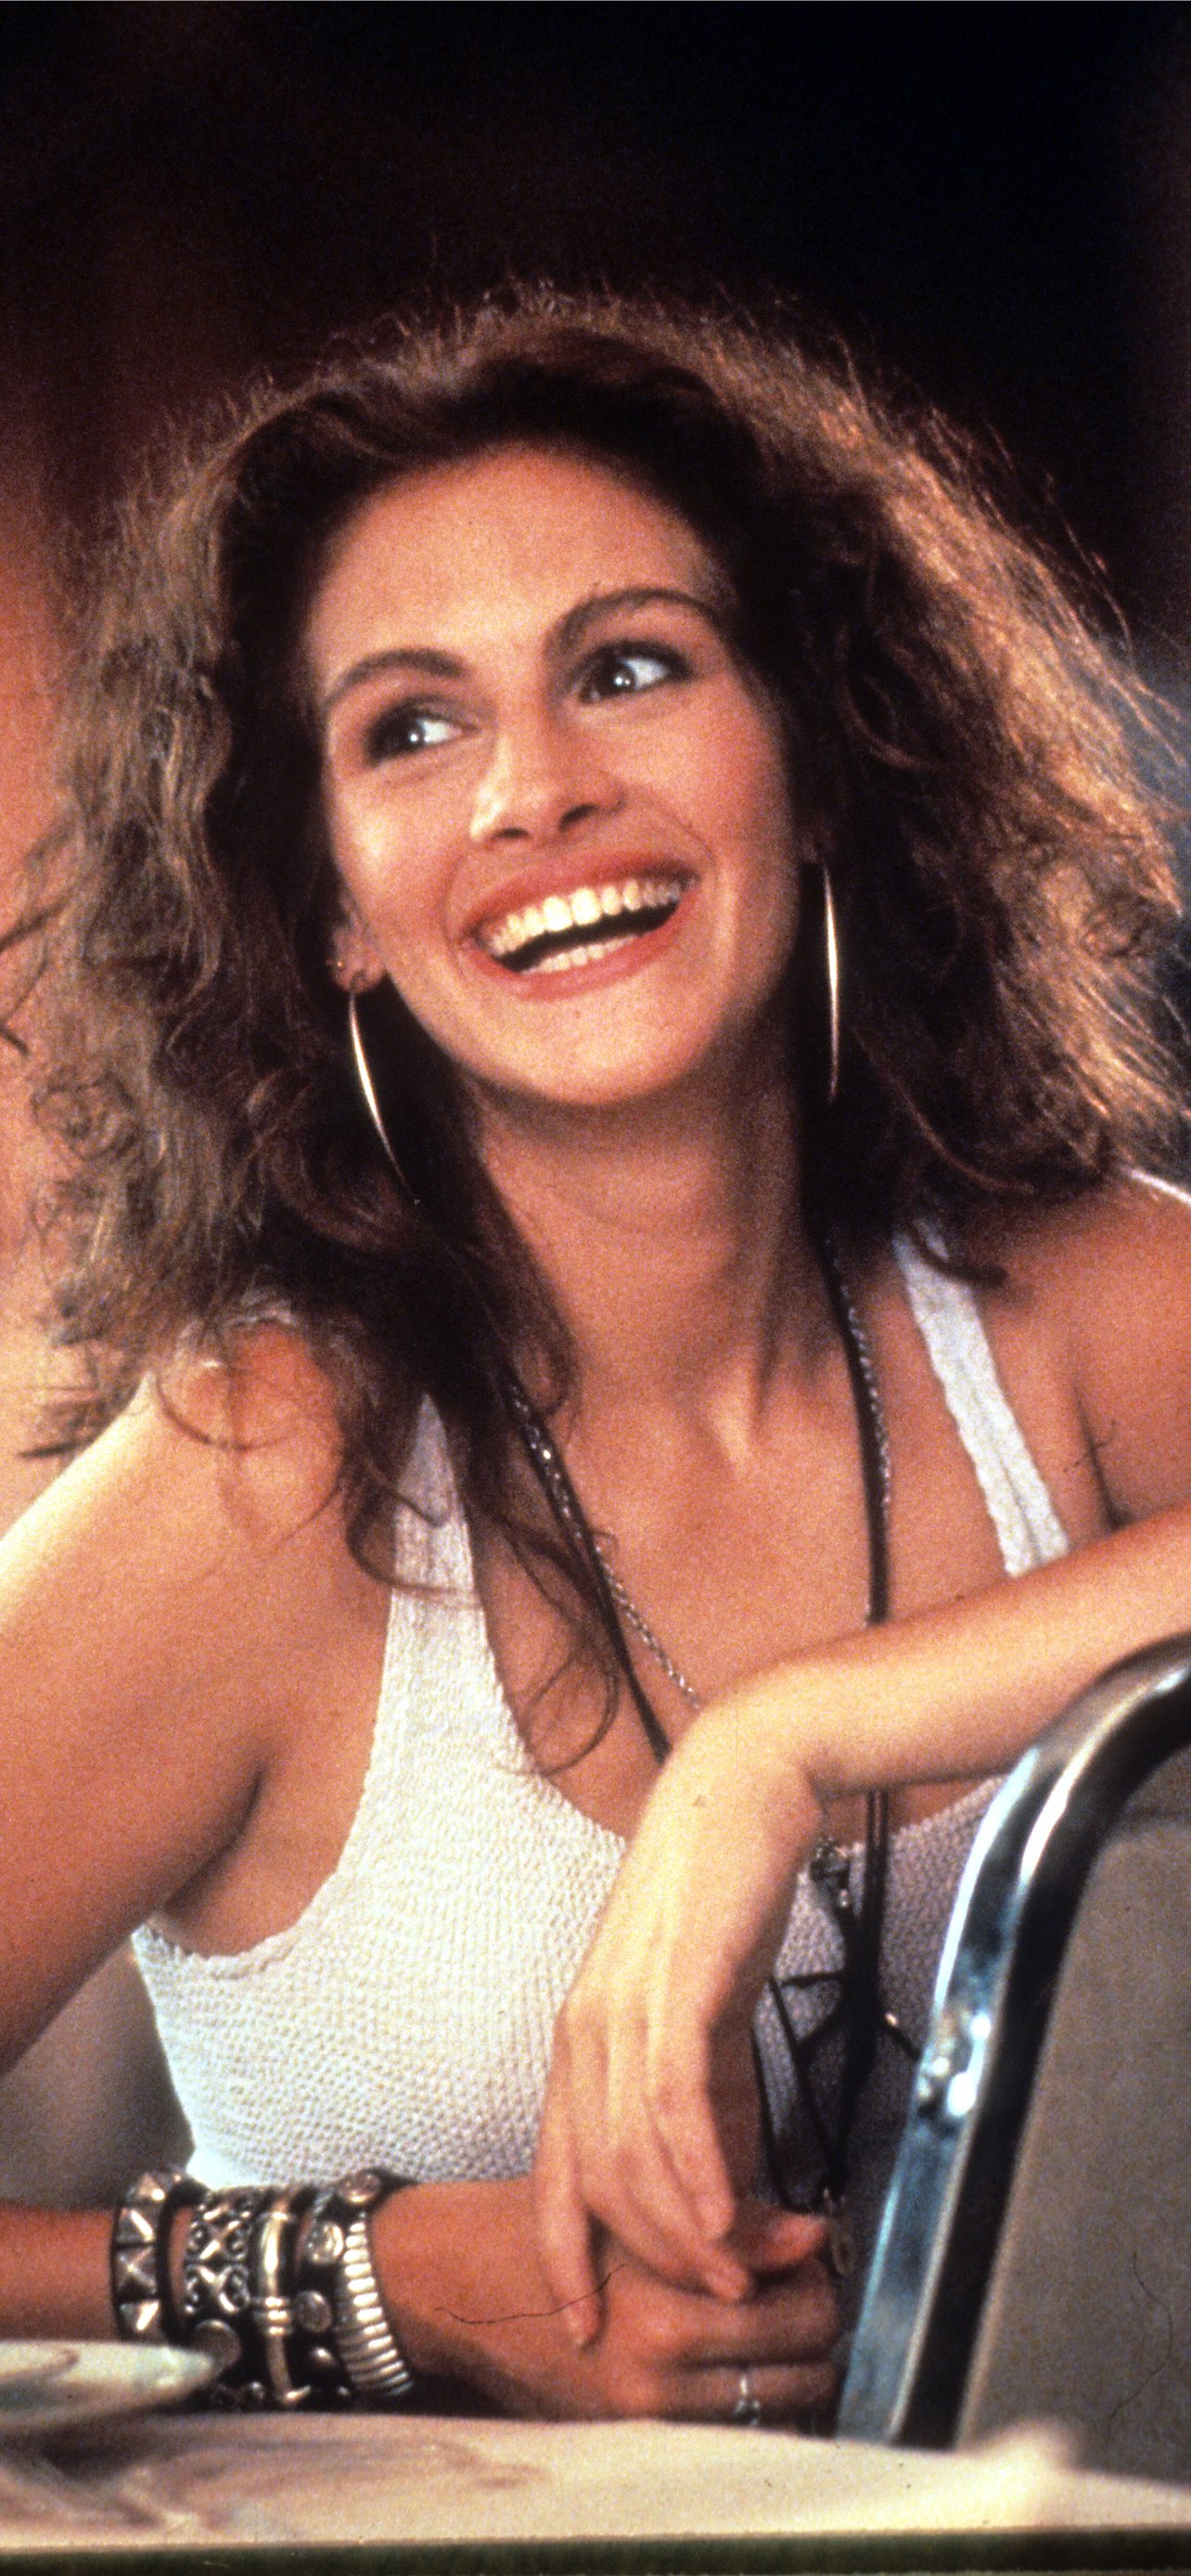 abel ai recommends pretty woman movie download pic